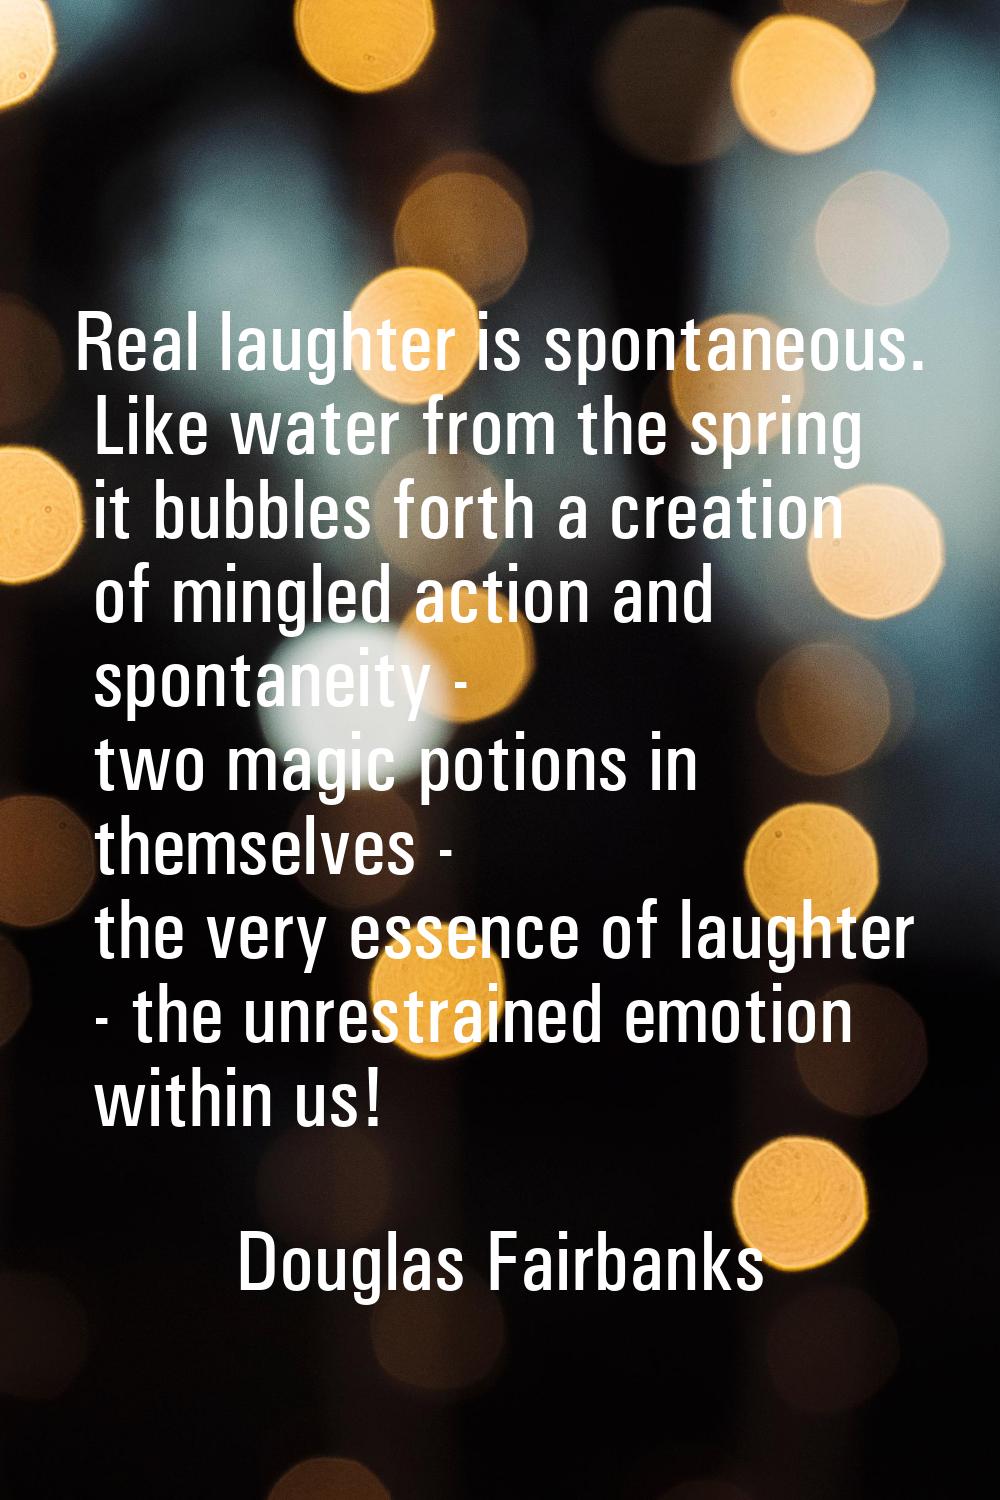 Real laughter is spontaneous. Like water from the spring it bubbles forth a creation of mingled act